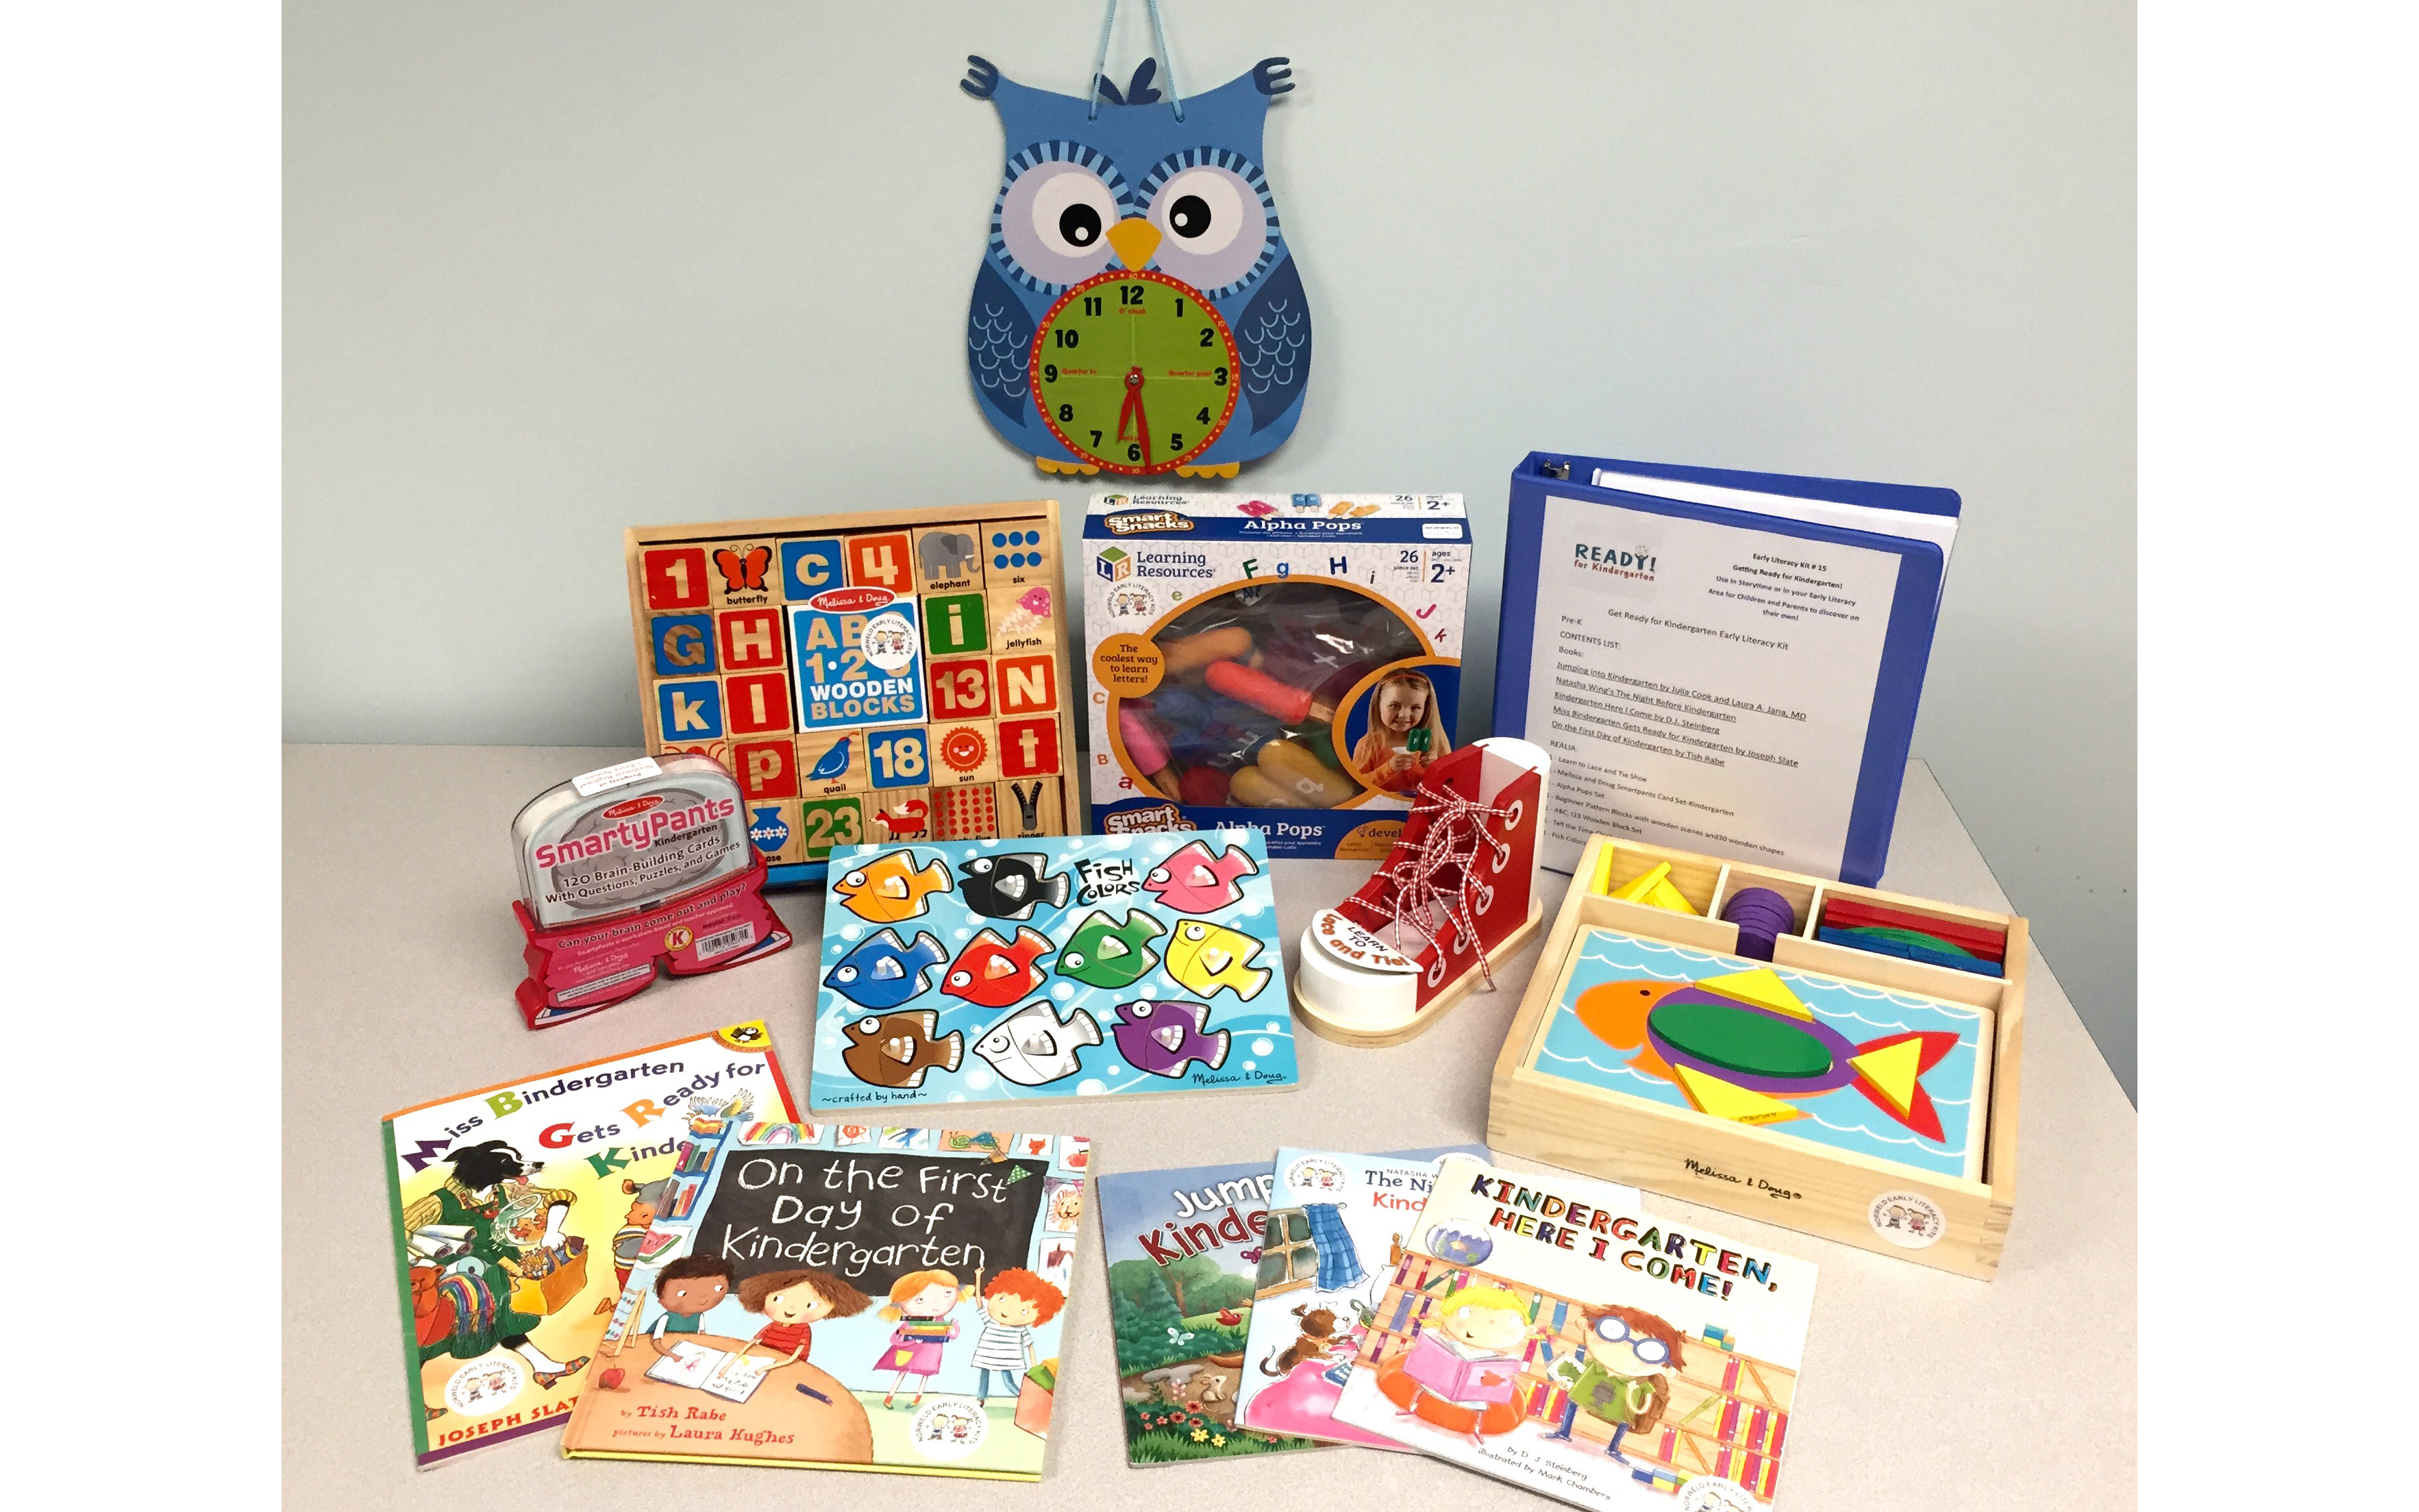 Contents of the Get Ready for Kindergarten Early Literacy Kit